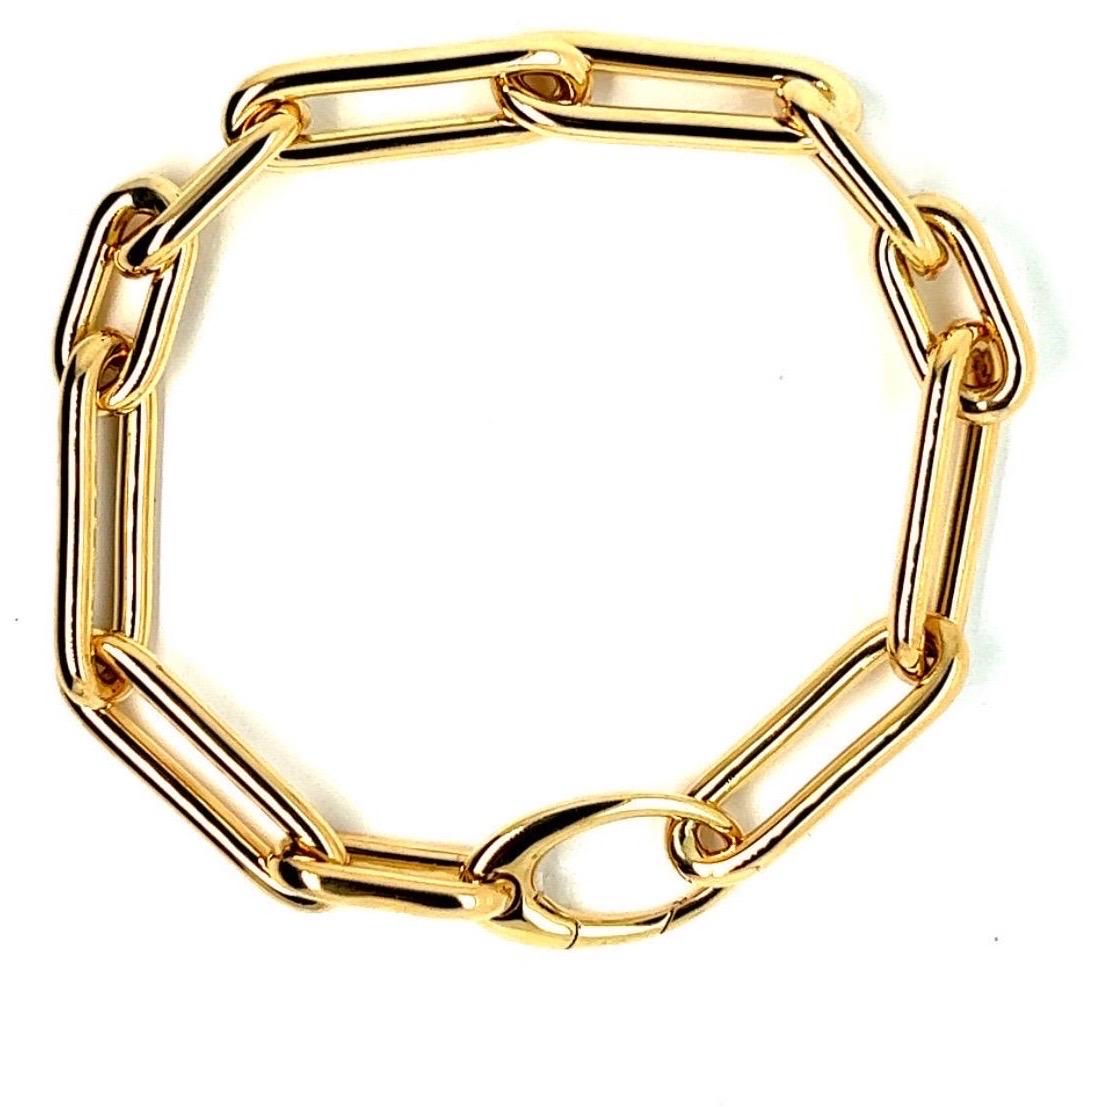 Discover this magnificent fine-link bracelet in 18-carat yellow gold, a timelessly elegant piece of jewelry that will add a touch of sophistication to your style. Crafted with care and expertise, this bracelet is designed to be worn every day,